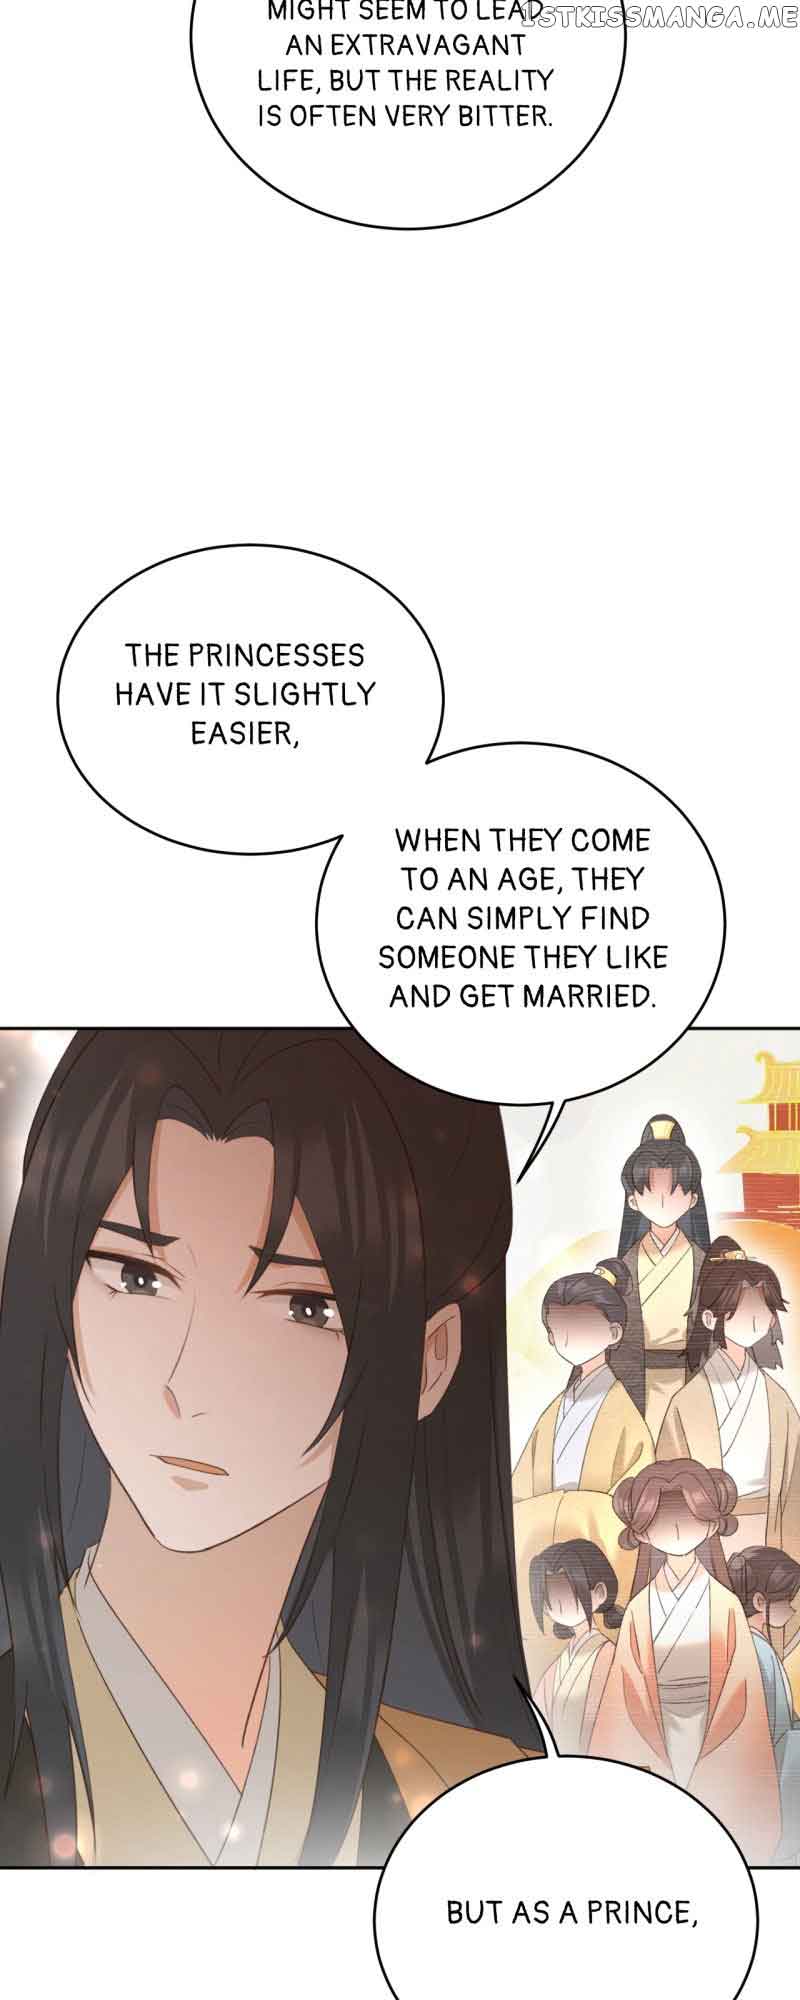 The Empress with No Virtue chapter 92